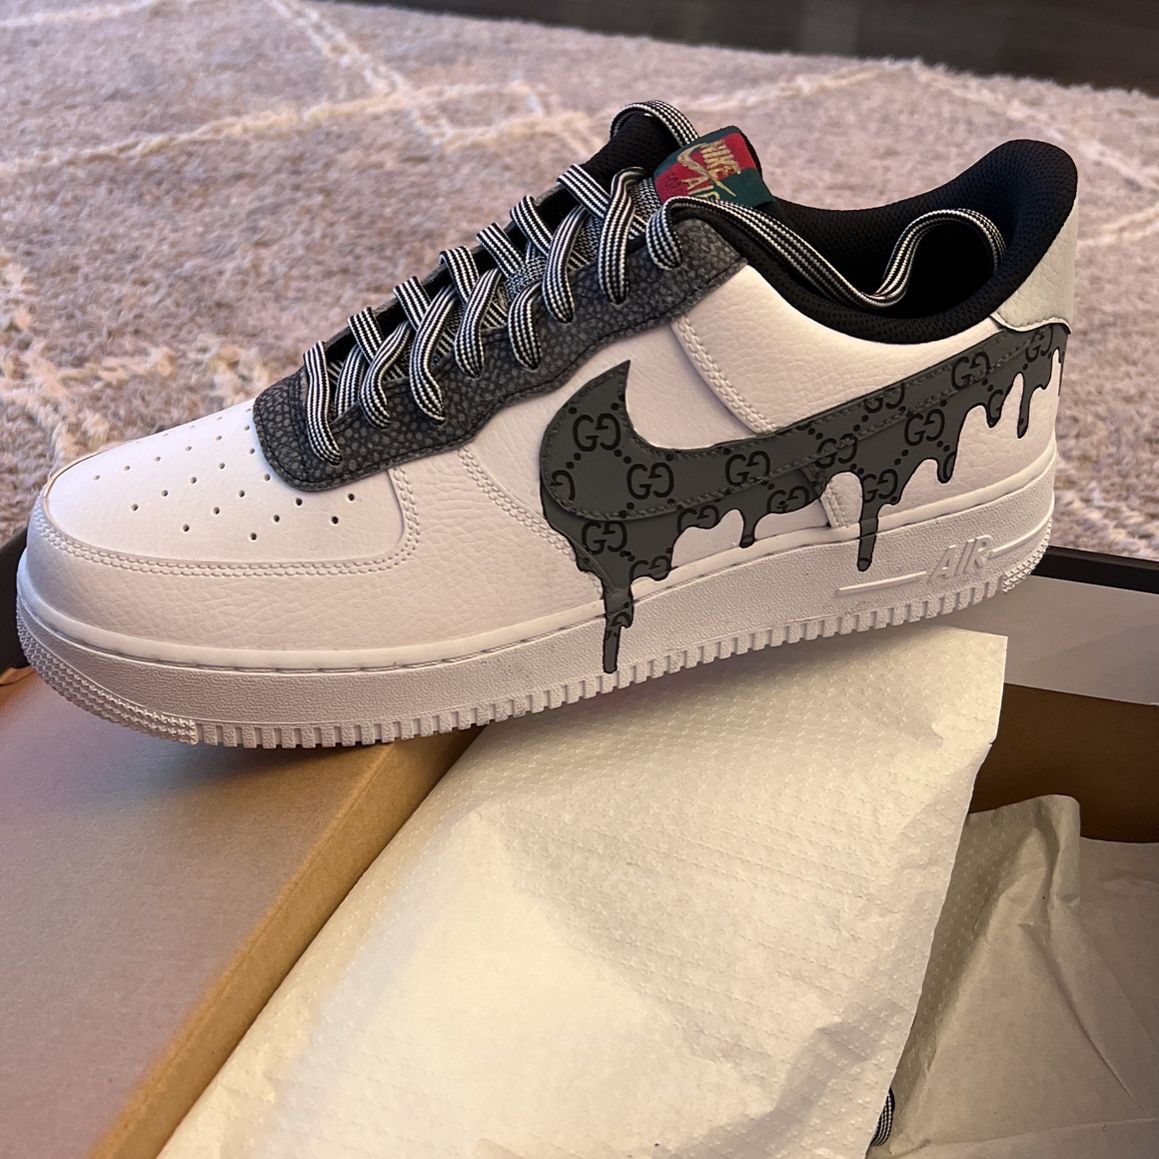 Nike Air Force 1 LV8 AF1 for Sale in Olympia, WA - OfferUp